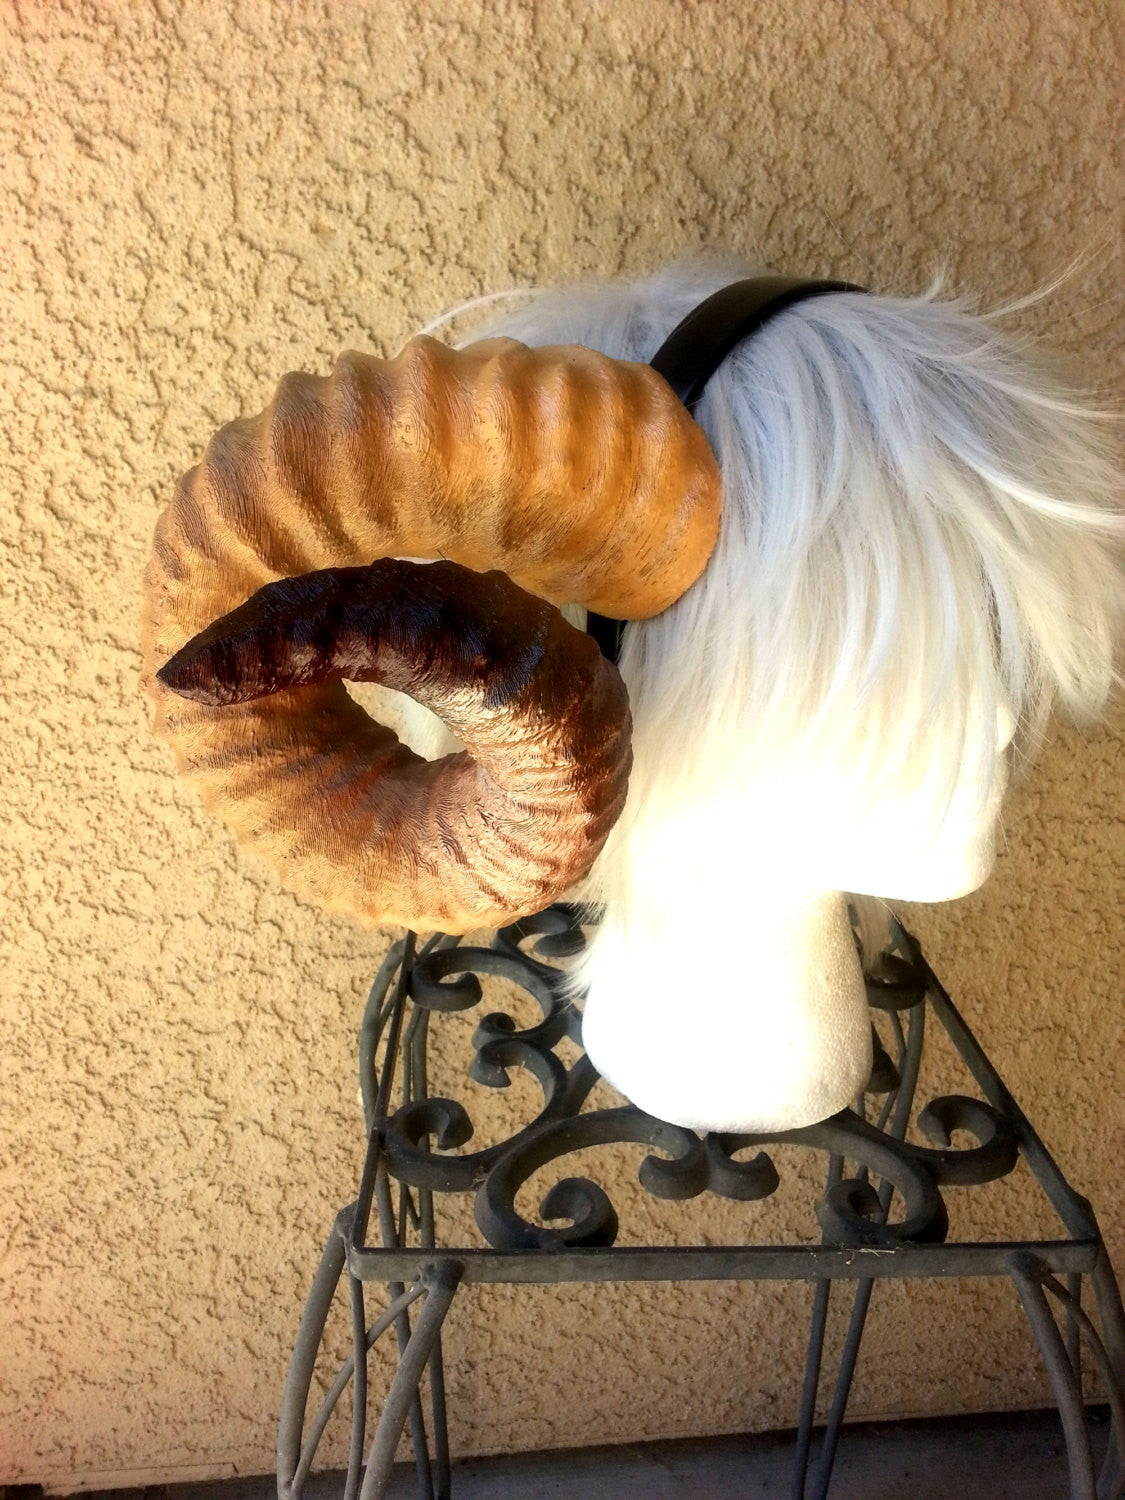 NEW ARRIVAL RAM horns headband 3D printed cosplay comicon Authentic true shape size ram horns wow swirly twisted extra large brown diy crown - Mud And Majesty